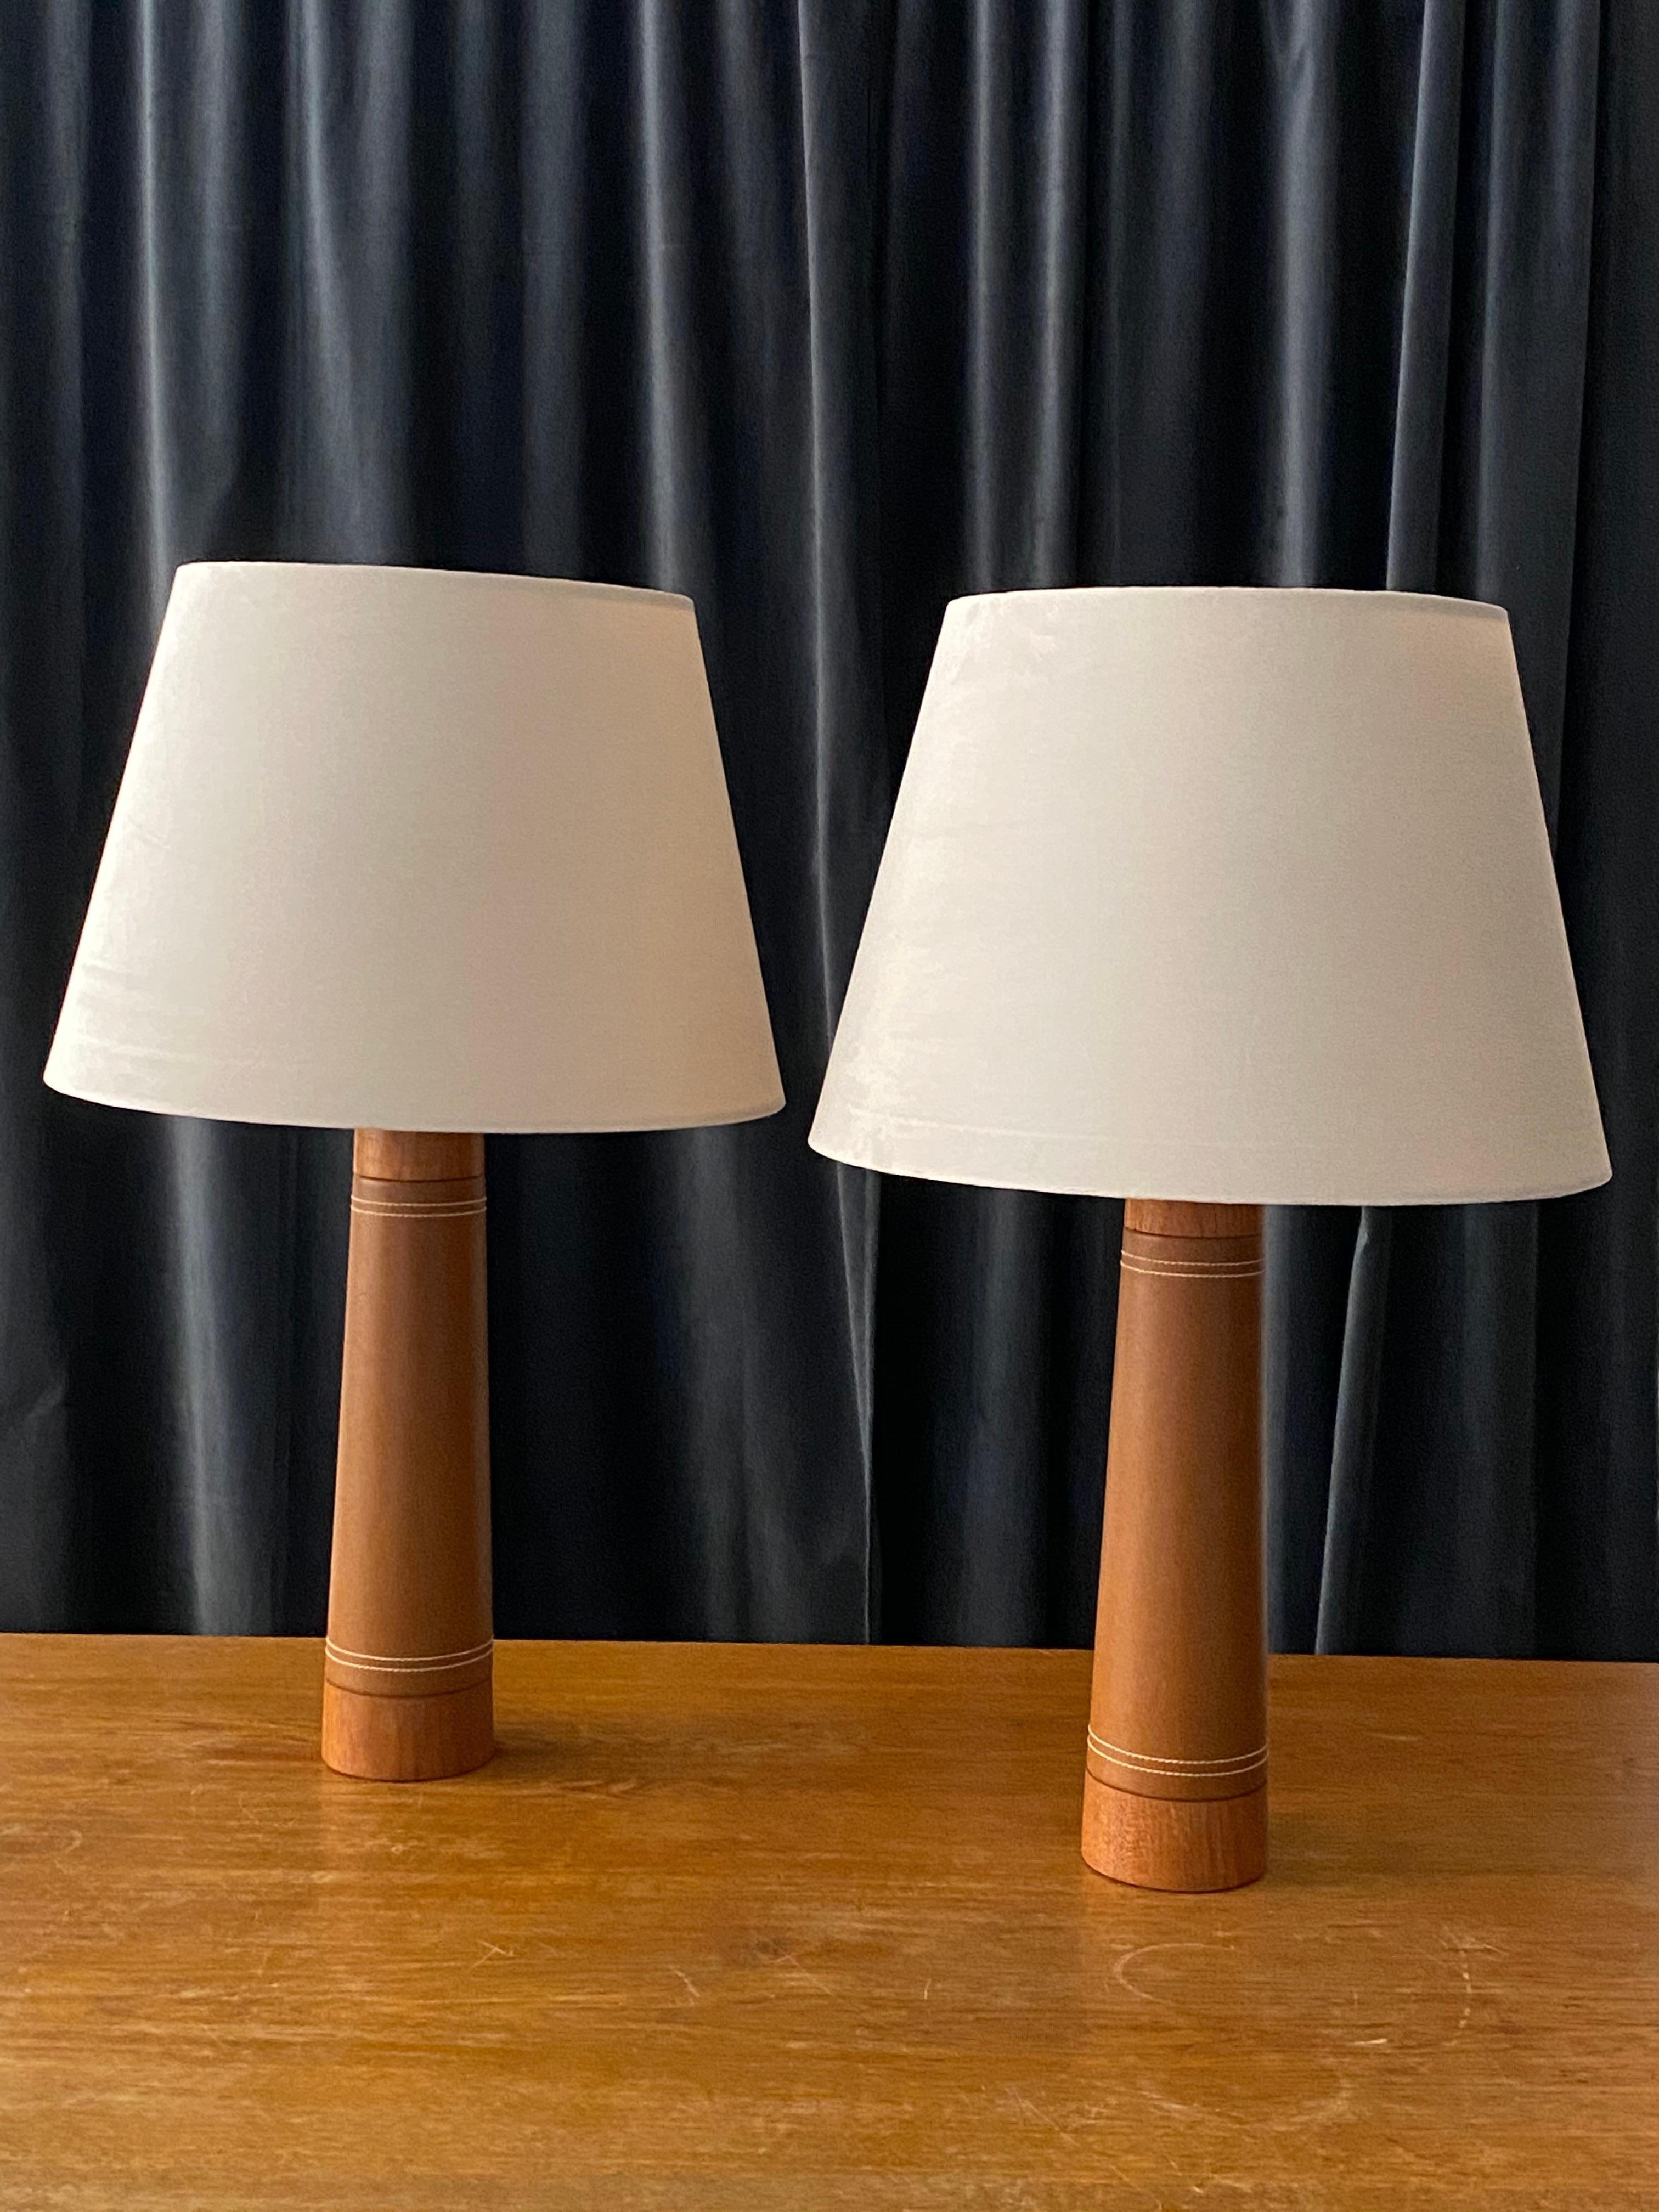 A pair of Minimalist table lamps, designed and produced in Sweden, circa 1960s. In solid sculpted teak and leatherette with contrasting stitching. 

Lampshades are attached for reference. Sold without lampshades. Measurements stated are of bases.